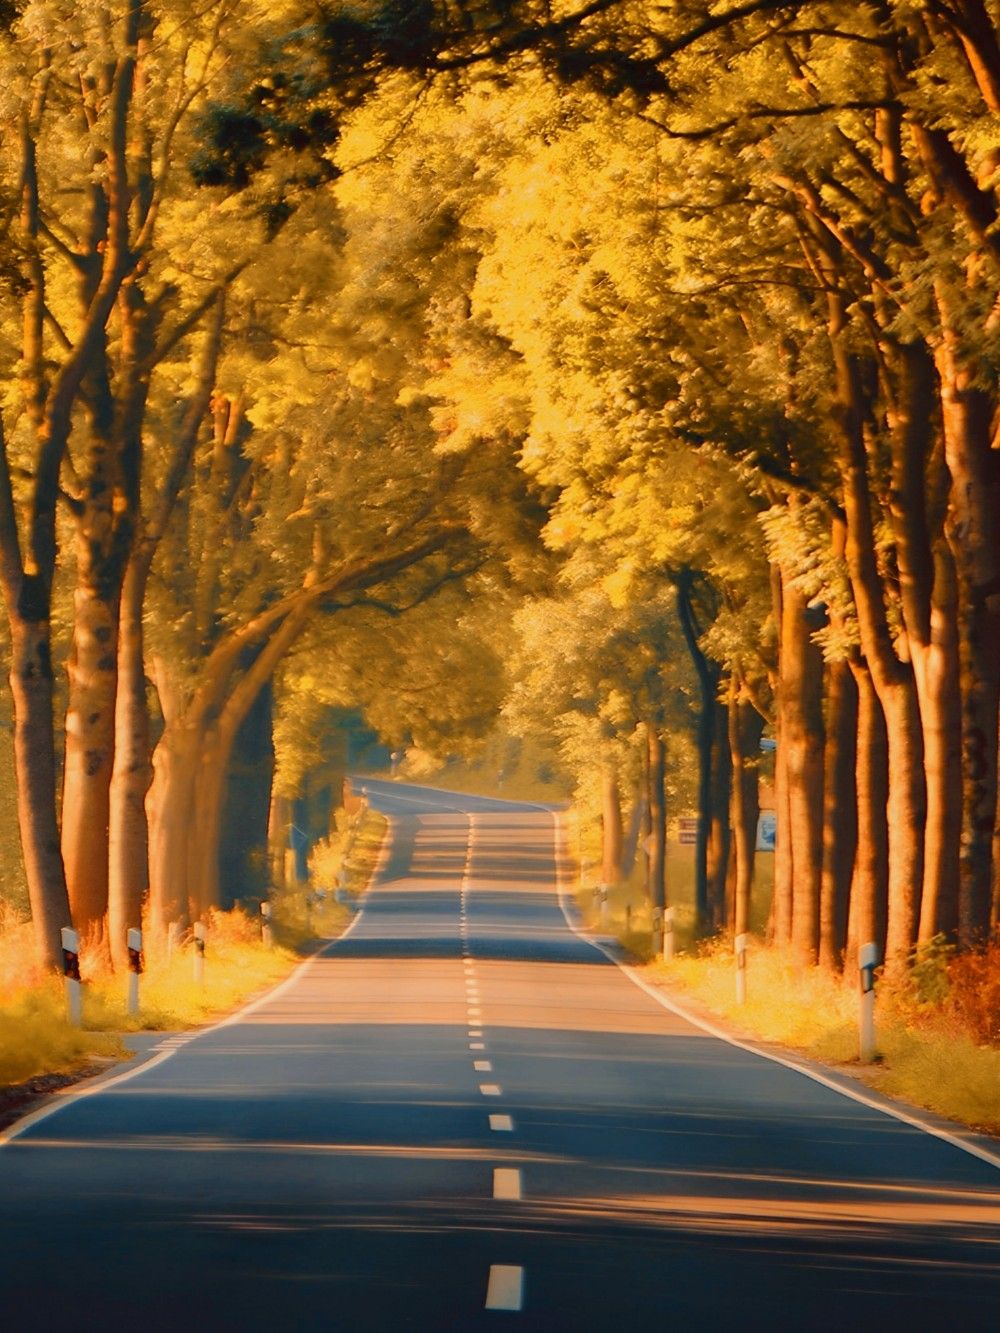 Download road background images #Free for editing